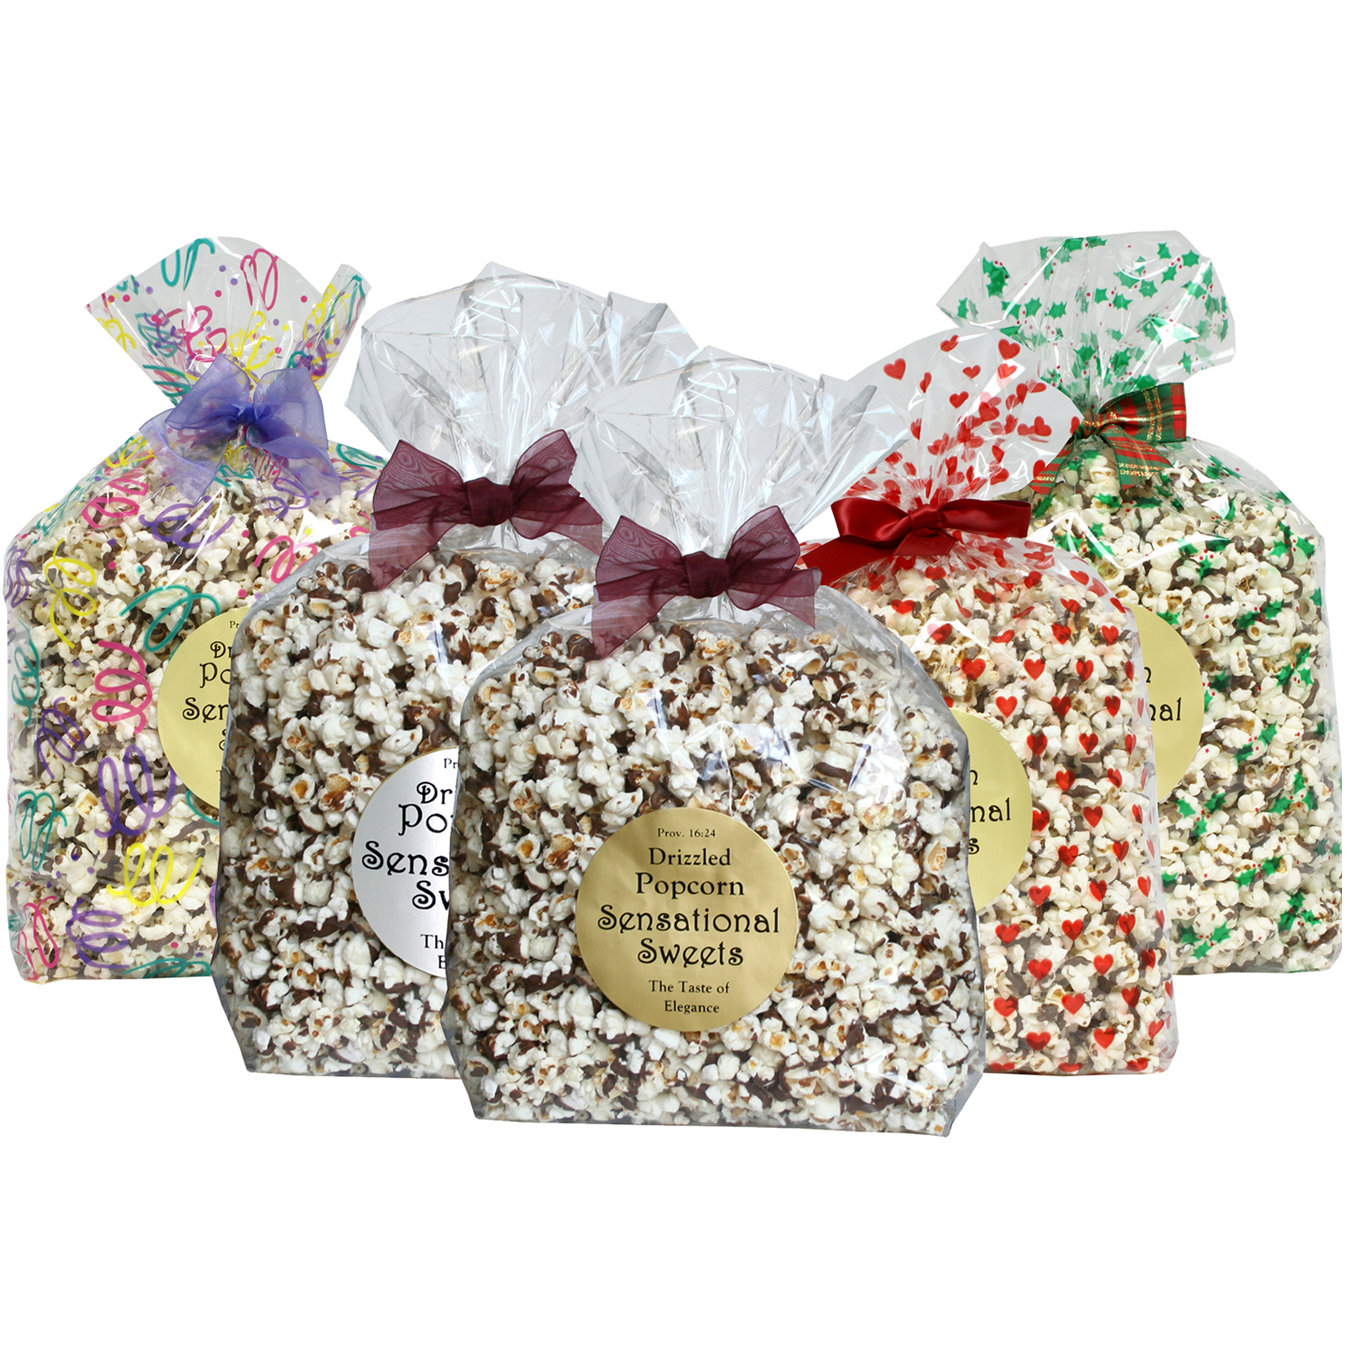 Gourmet Chocolate Drizzled Popcorn (1 lb. Bag with Bow)